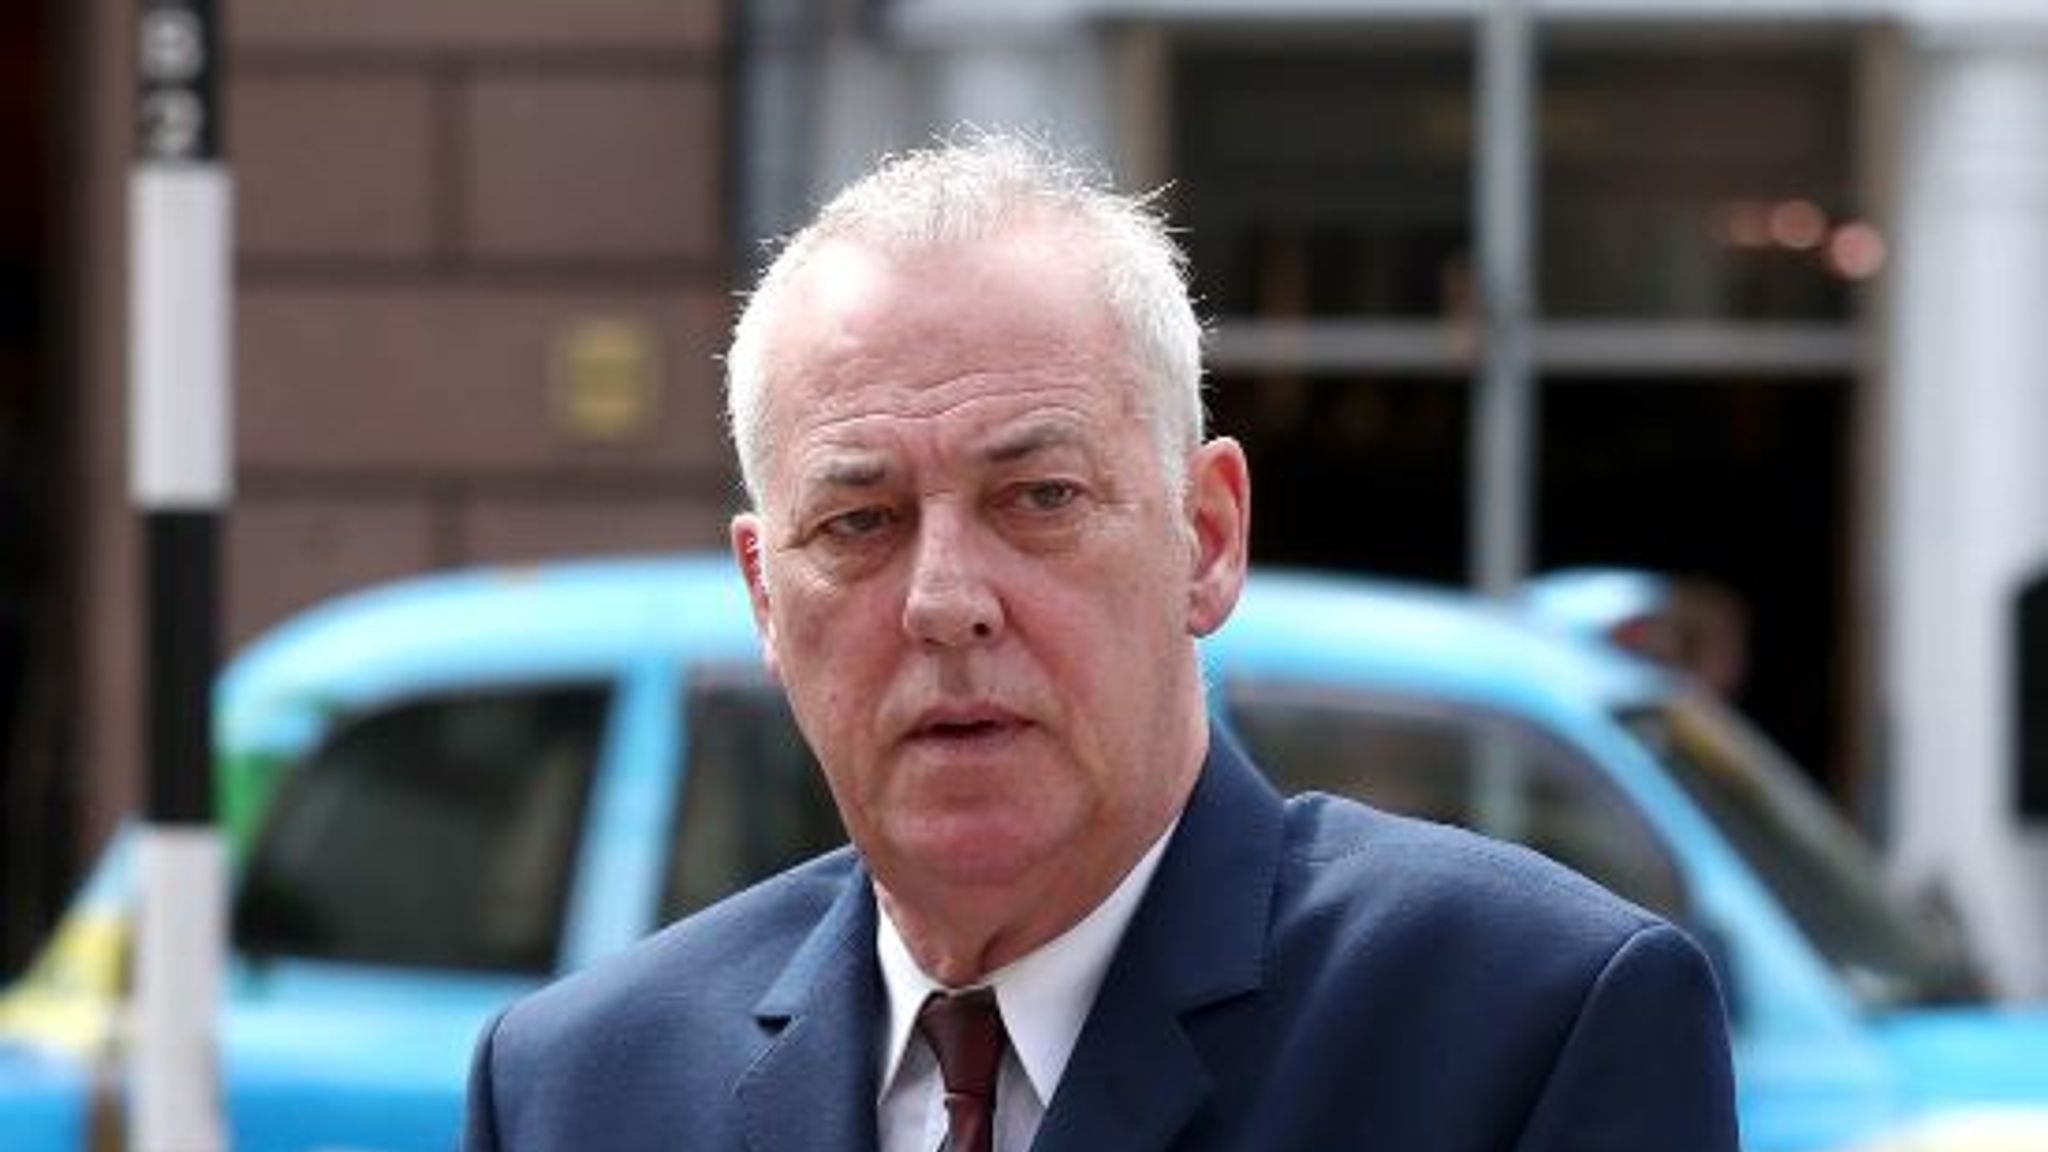 Michael Barrymore pool death Man arrested over murder at star's home